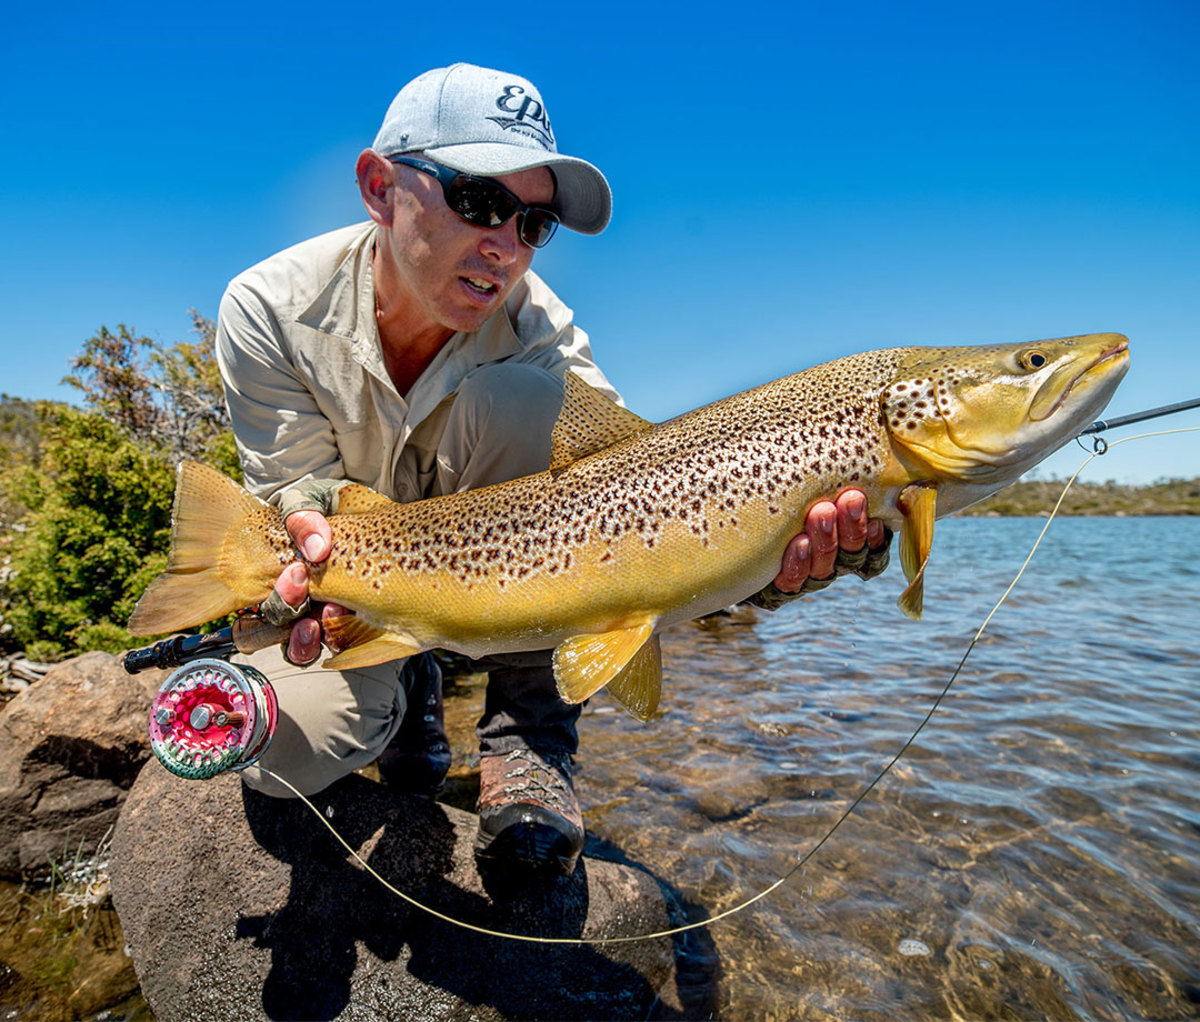 Fishing for trout in Tasmania’s Western Lakes region